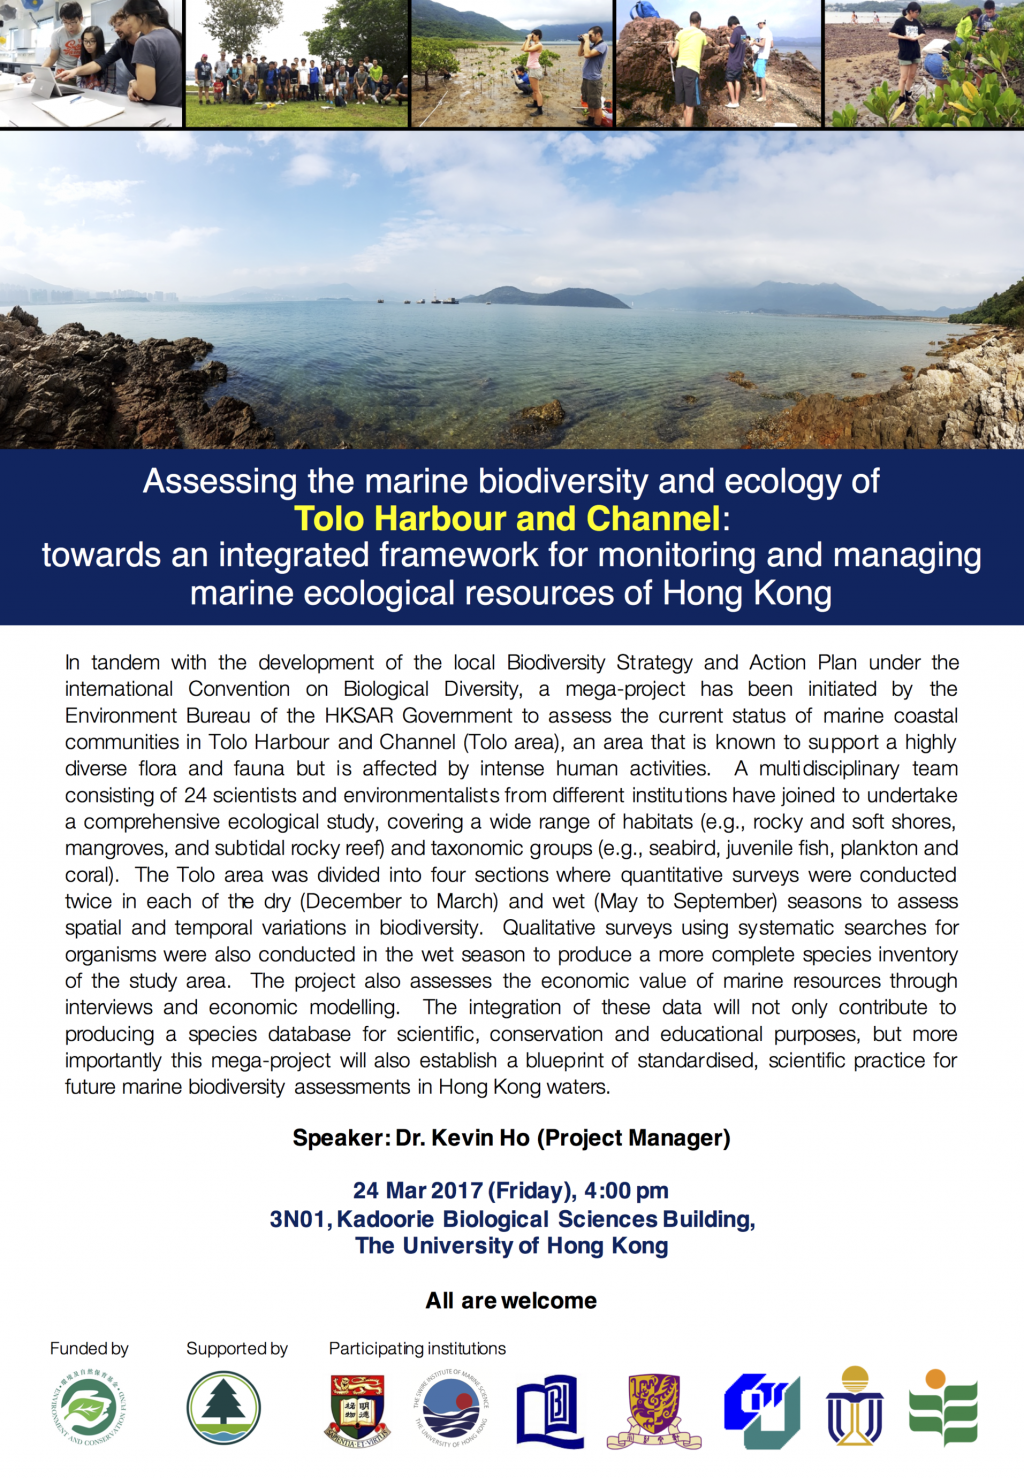 Seminar on Marine Biodiversity in Tolo Harbour and Channel